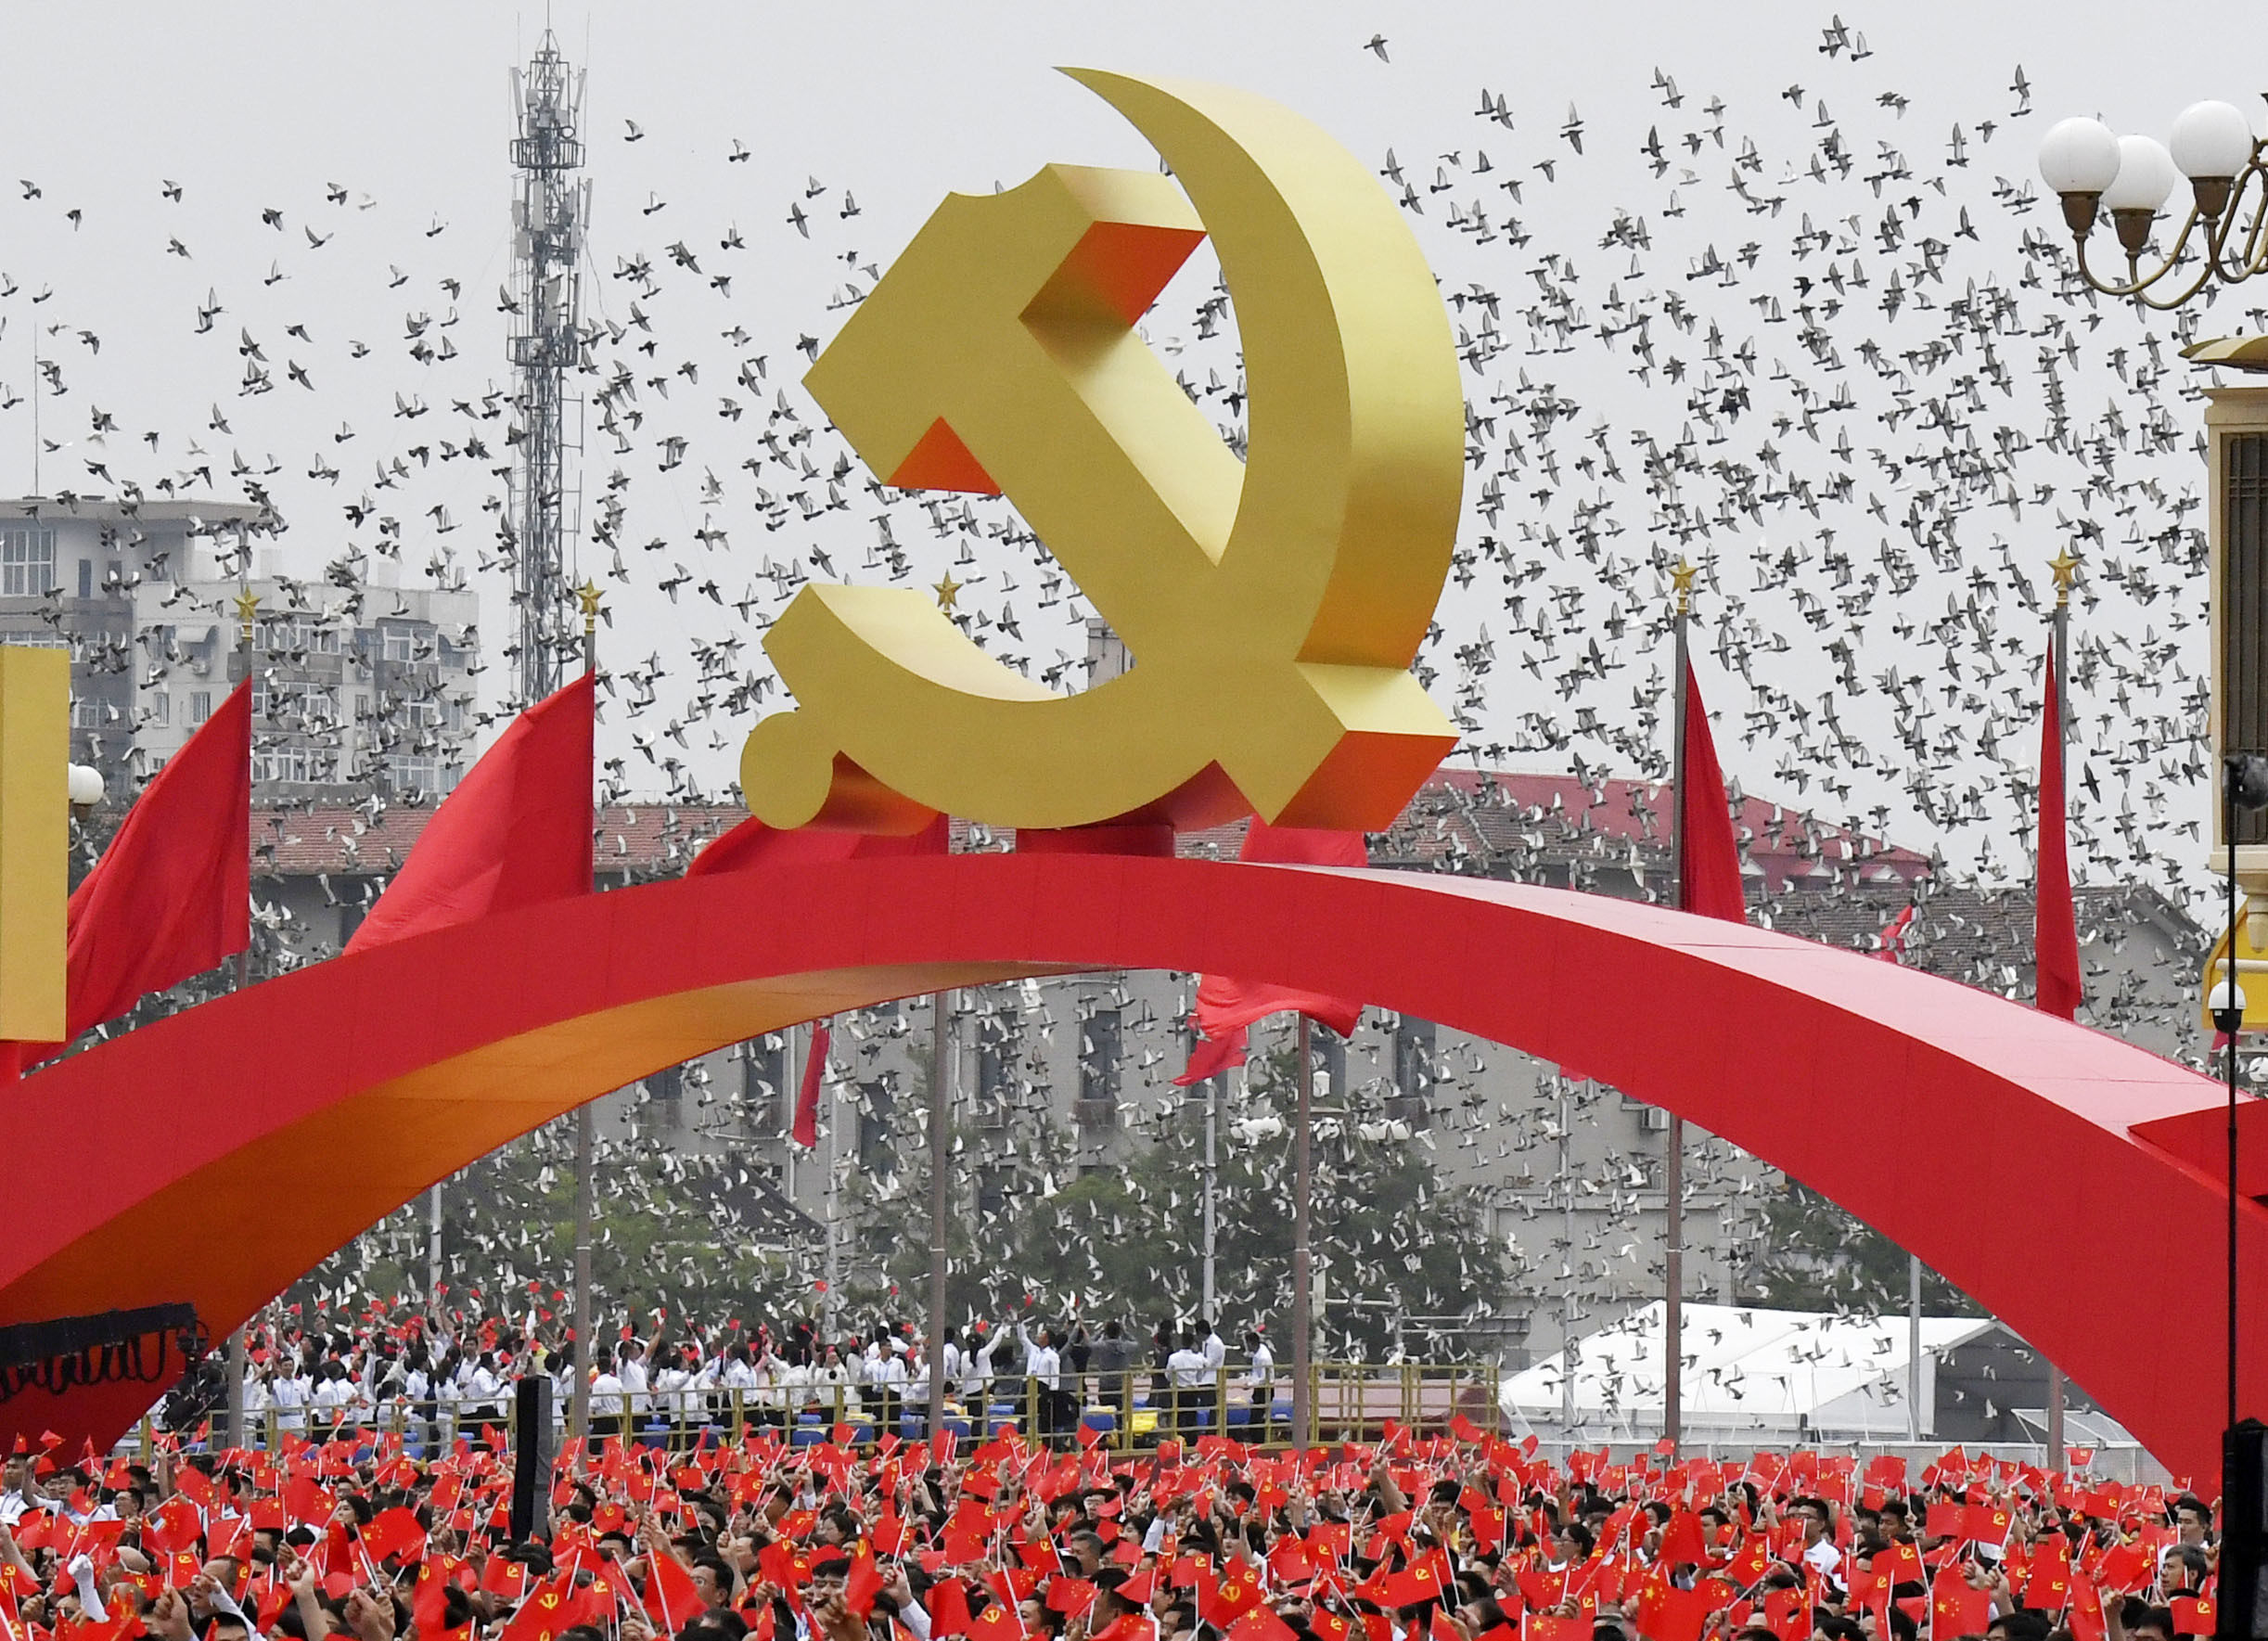 An event to celebrate the 100th anniversary of the founding of the Communist Party of China is held at Tiananmen Square in Beijing on July 1. Photo: Kyodo 